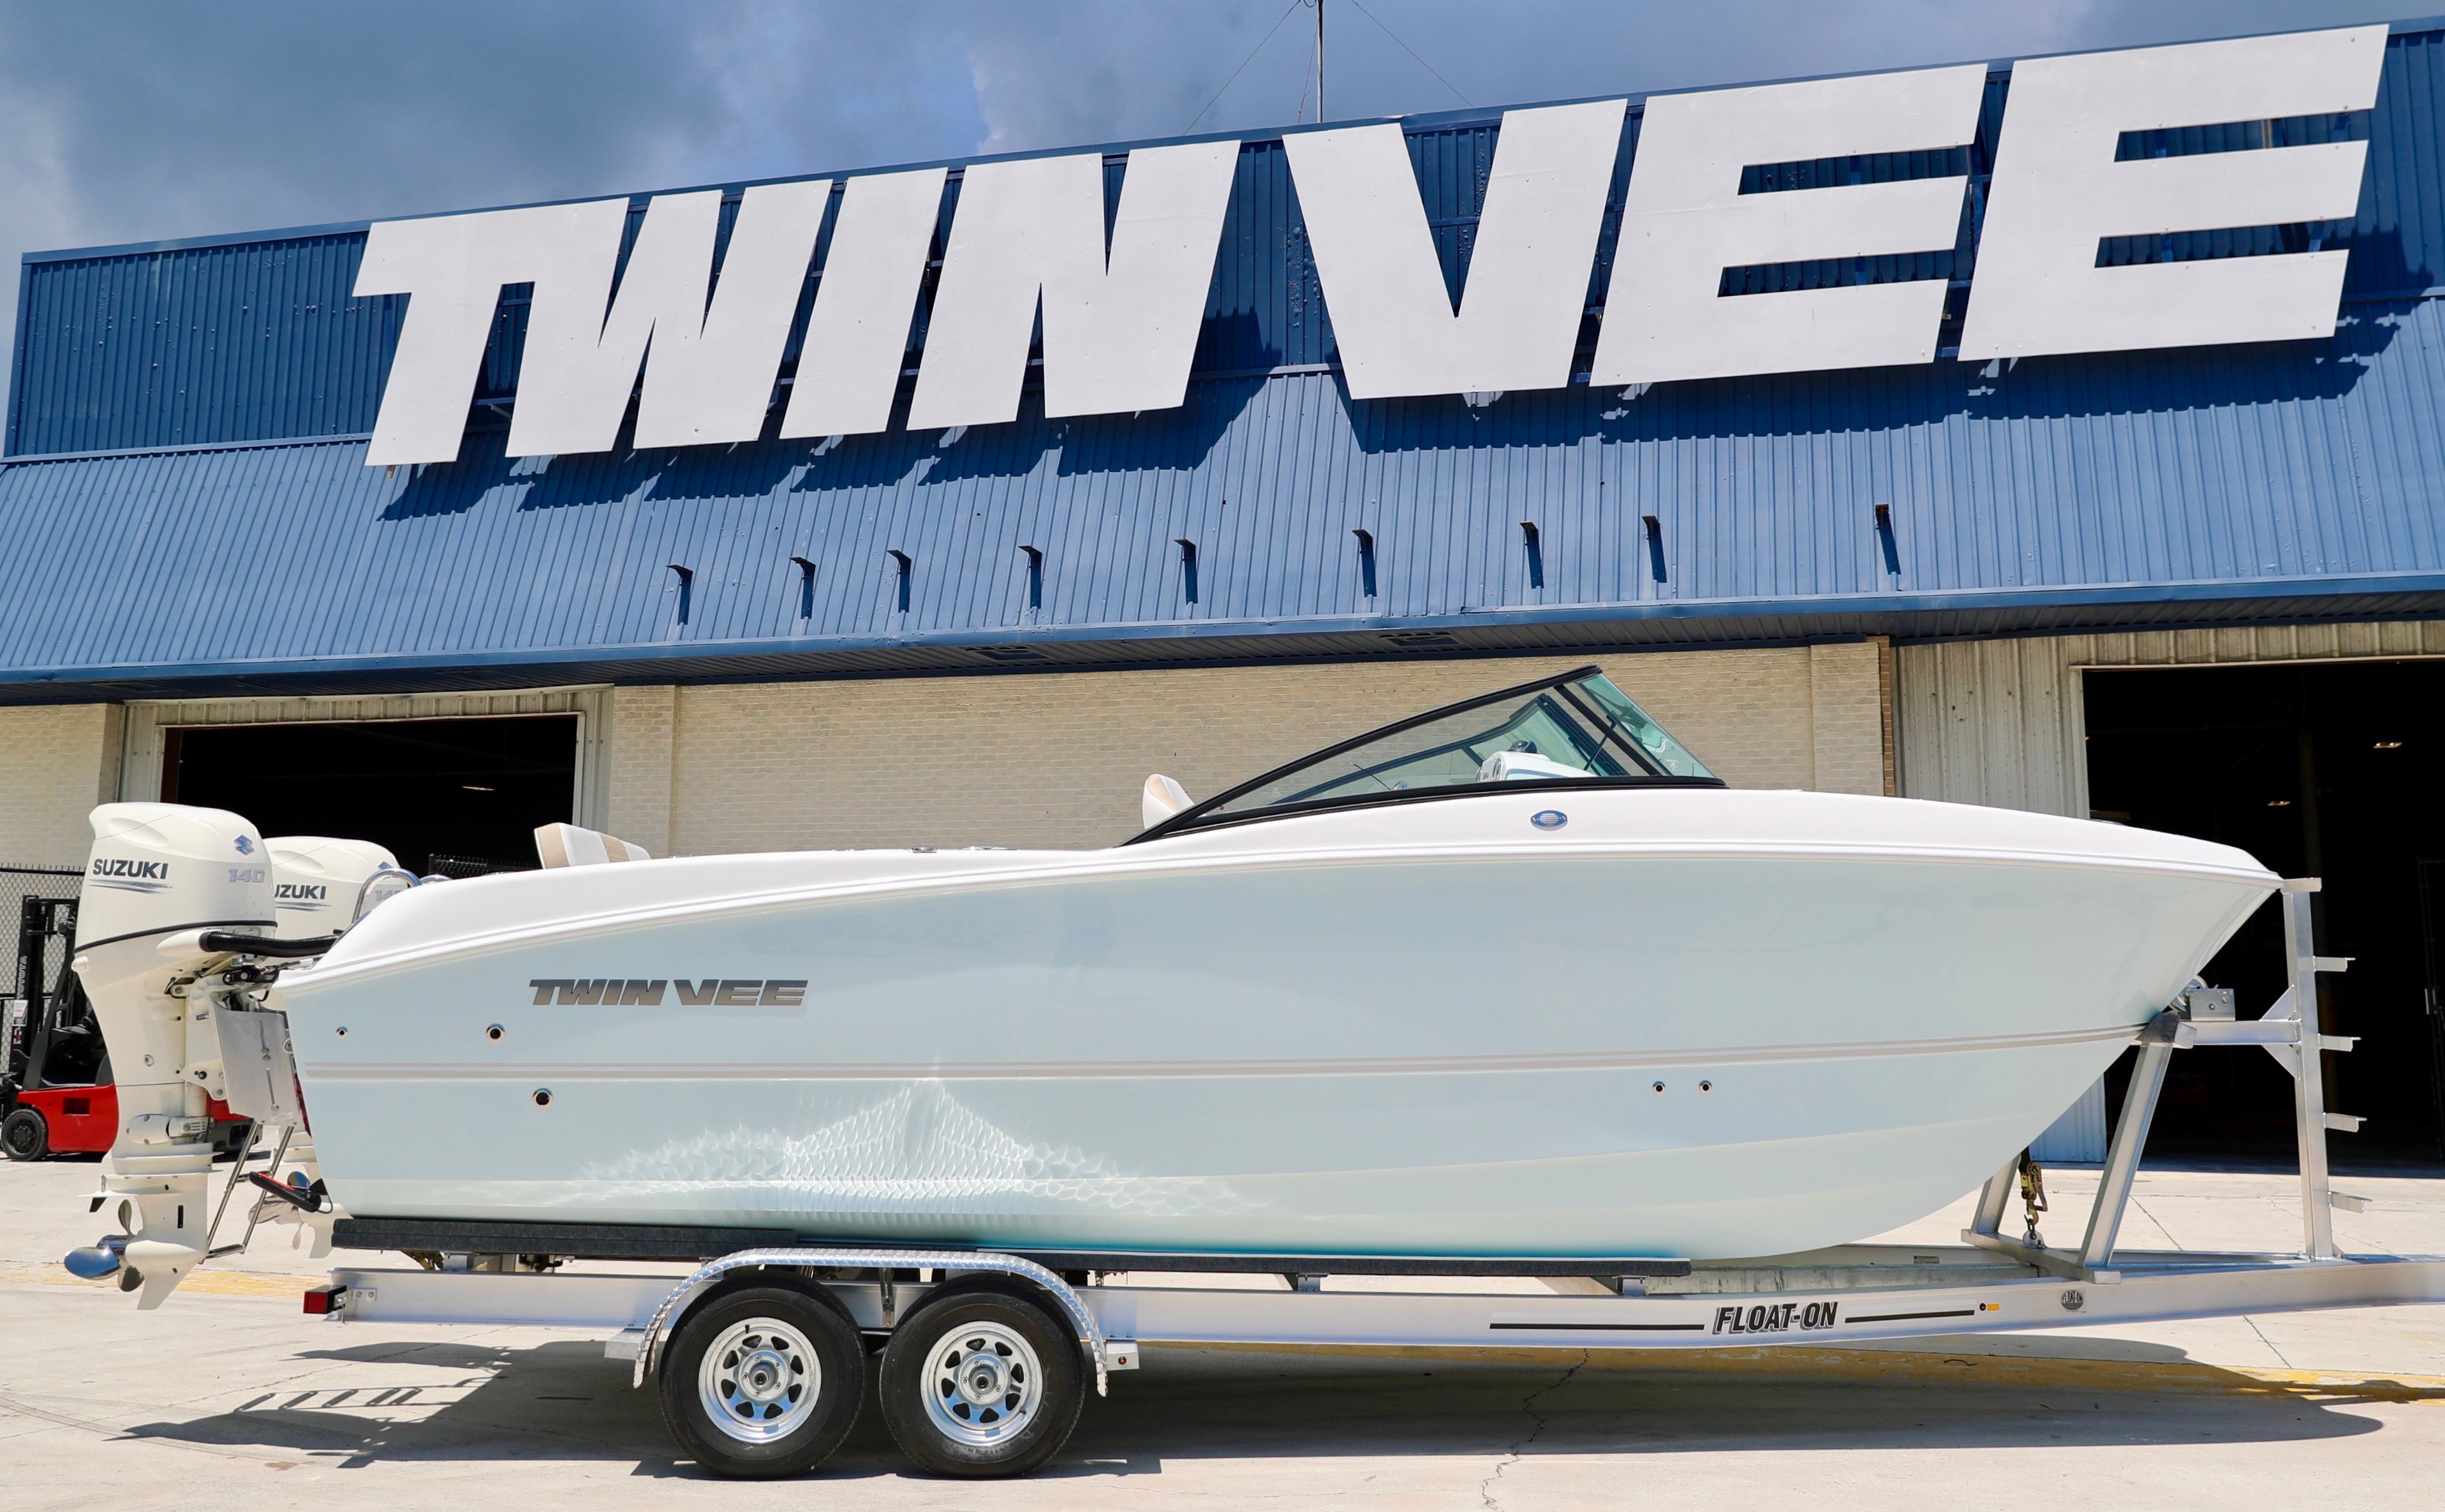 Twin Vee Powercats, Inc., Wednesday, September 4, 2019, Press release picture